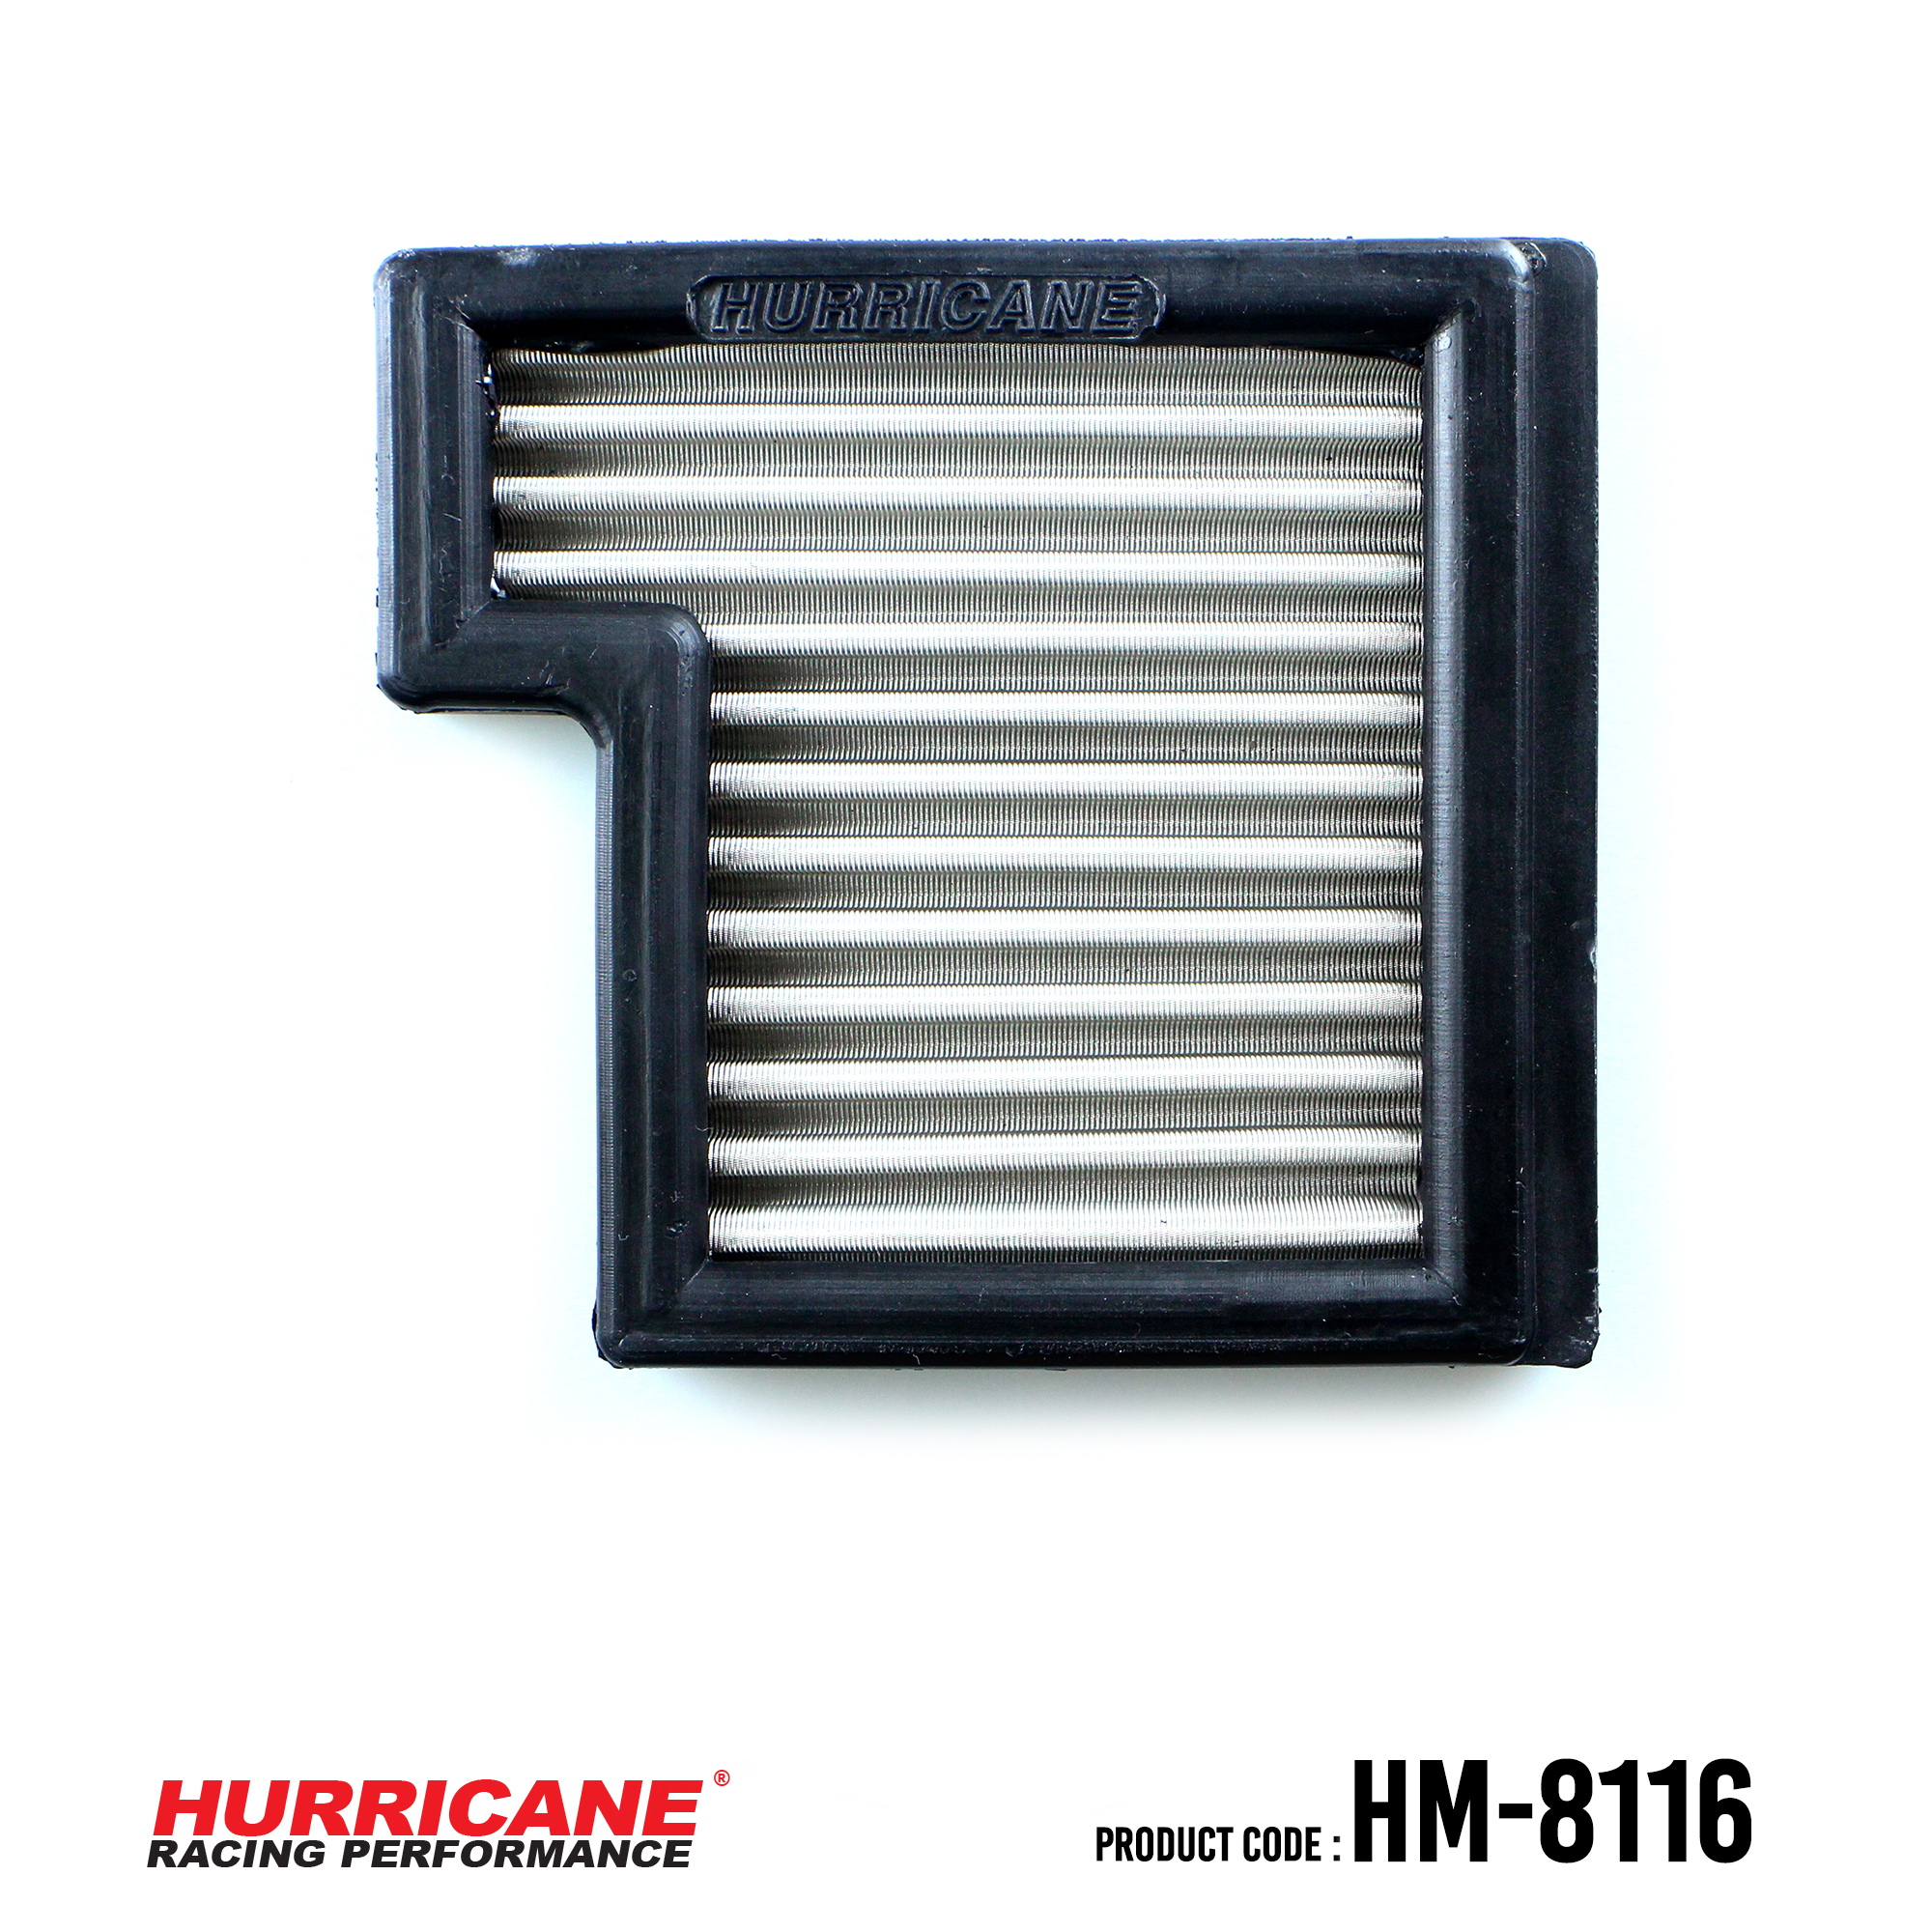 HURRICANE STAINLESS STEEL AIR FILTER FOR HM-8116 Yamaha